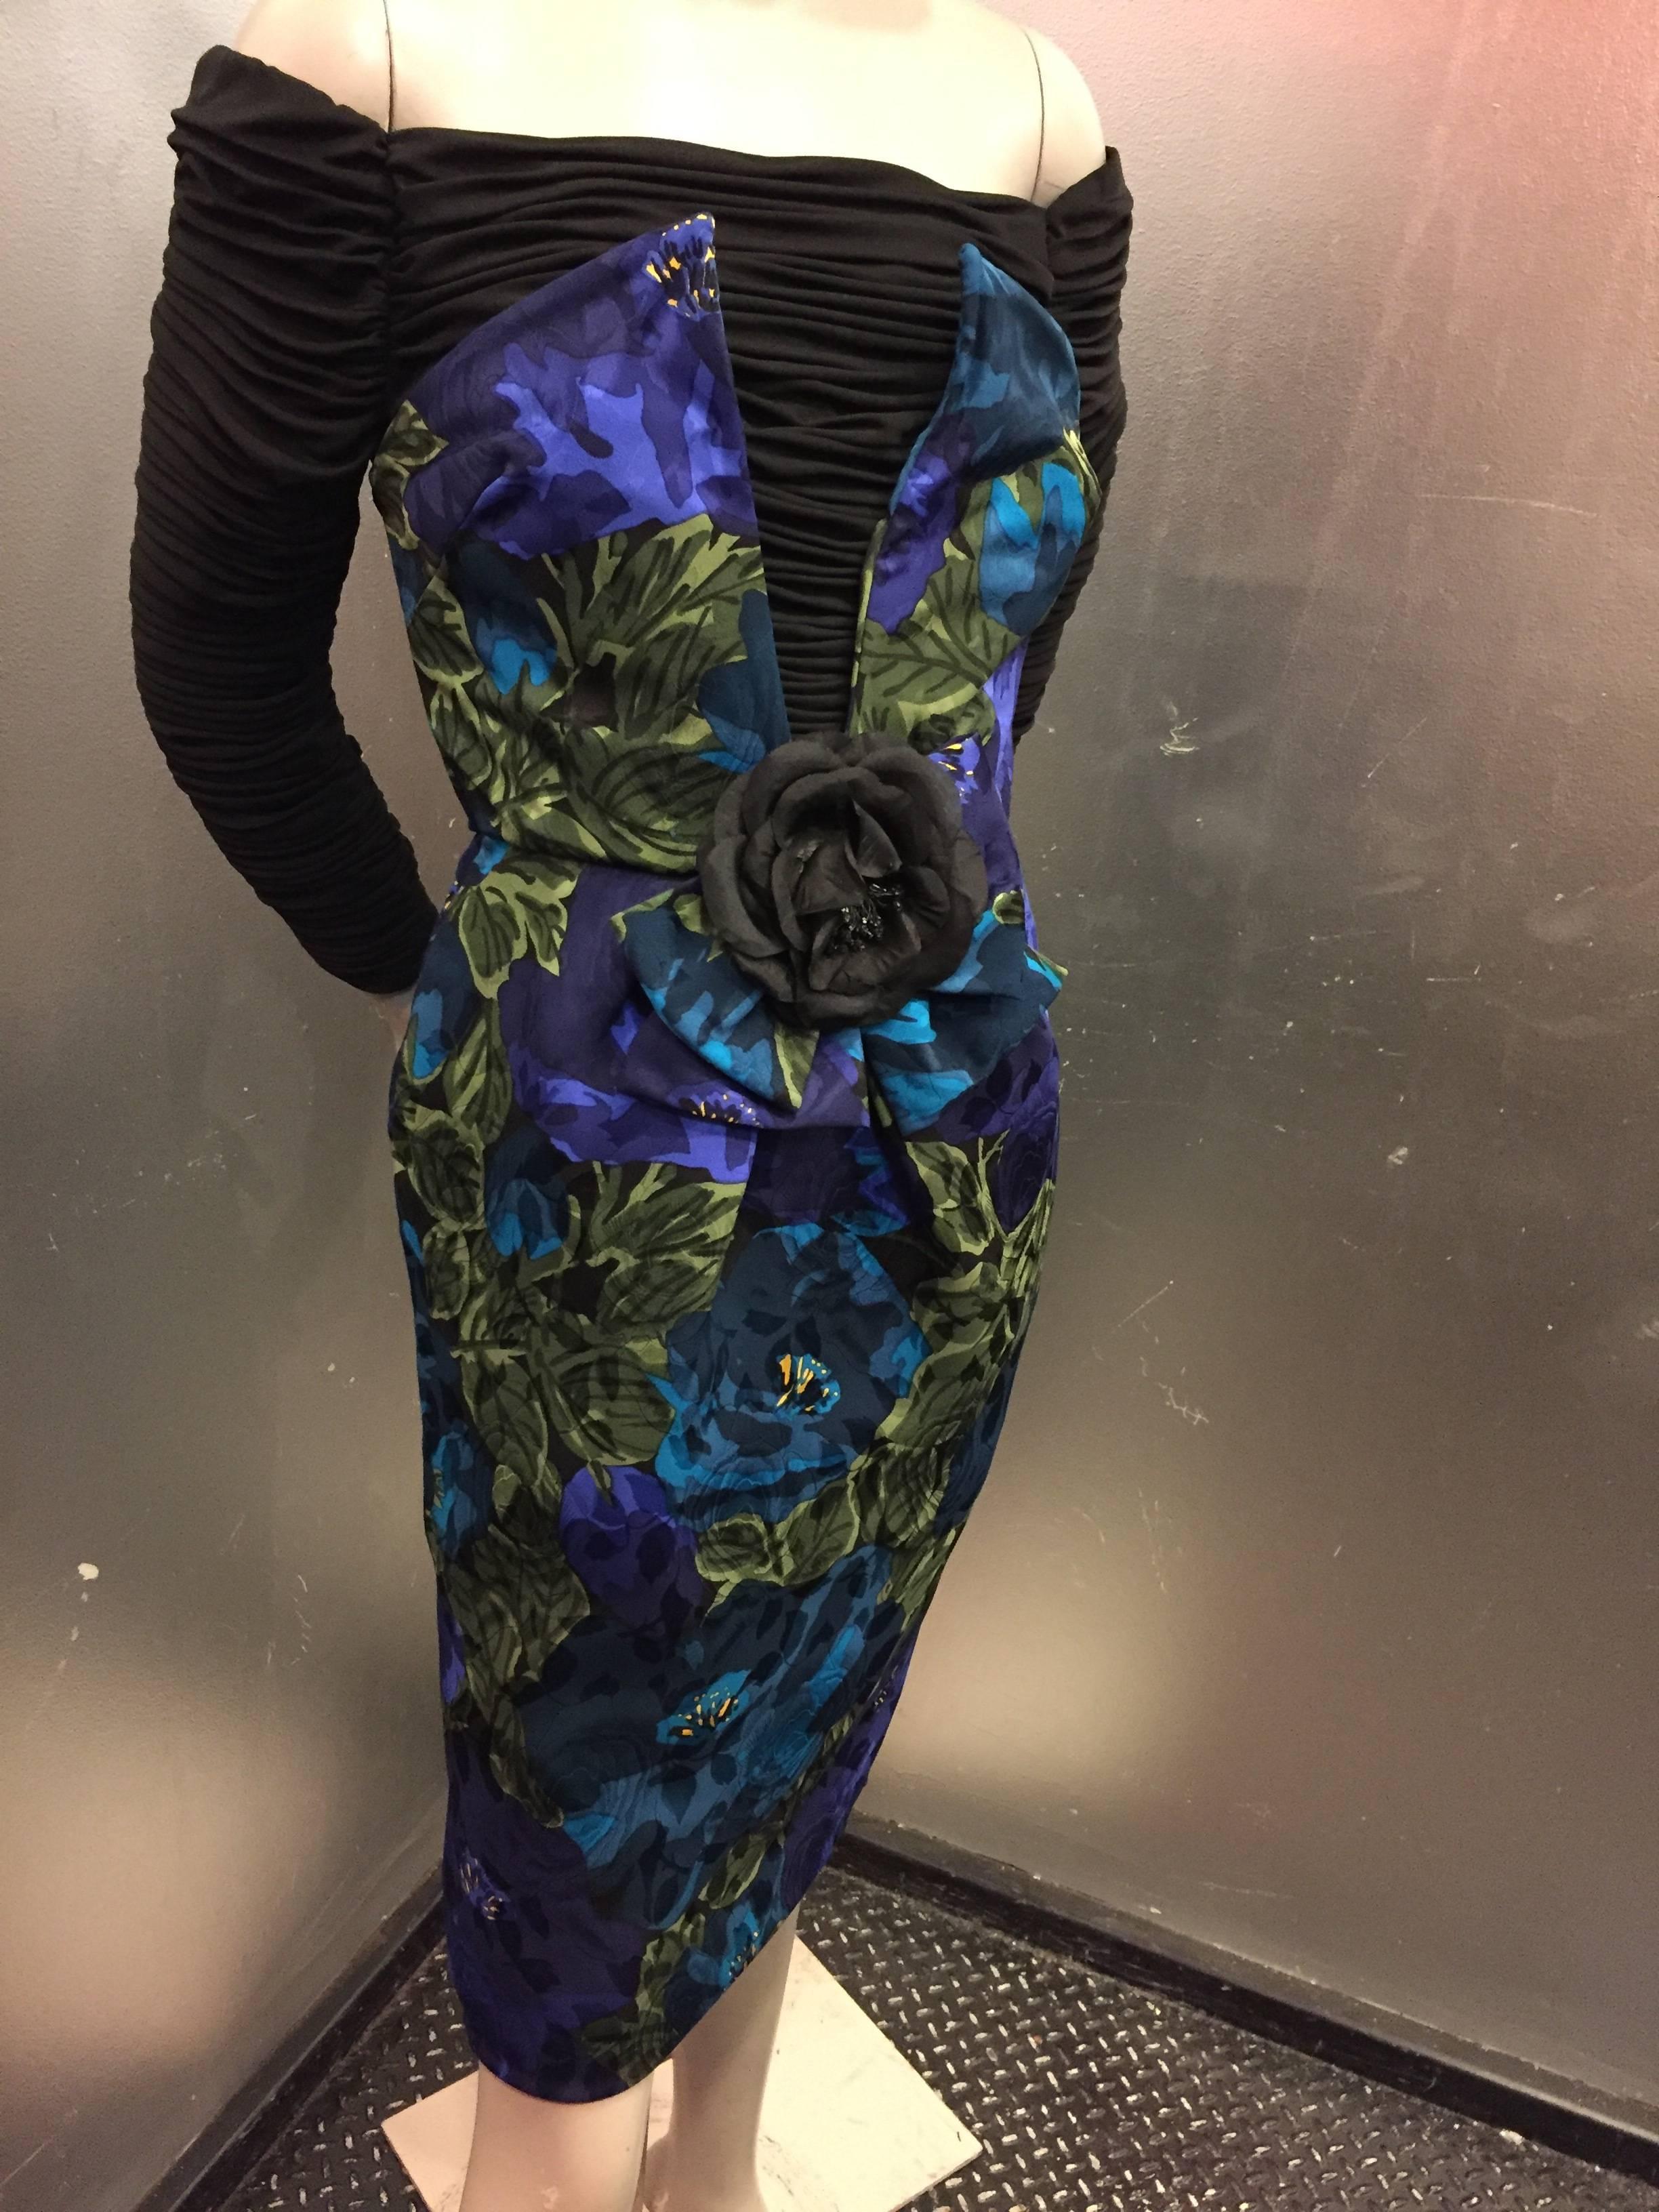 An unusual and sensational avant garde 1980s Loubé cocktail dress that features a gorgeous jewel-tone floral print crepe sheath dress with a Trompe L'Oeil Strapless silhouette, attached to a black ruched jersey off-the-shoulder neckline.  Heavily